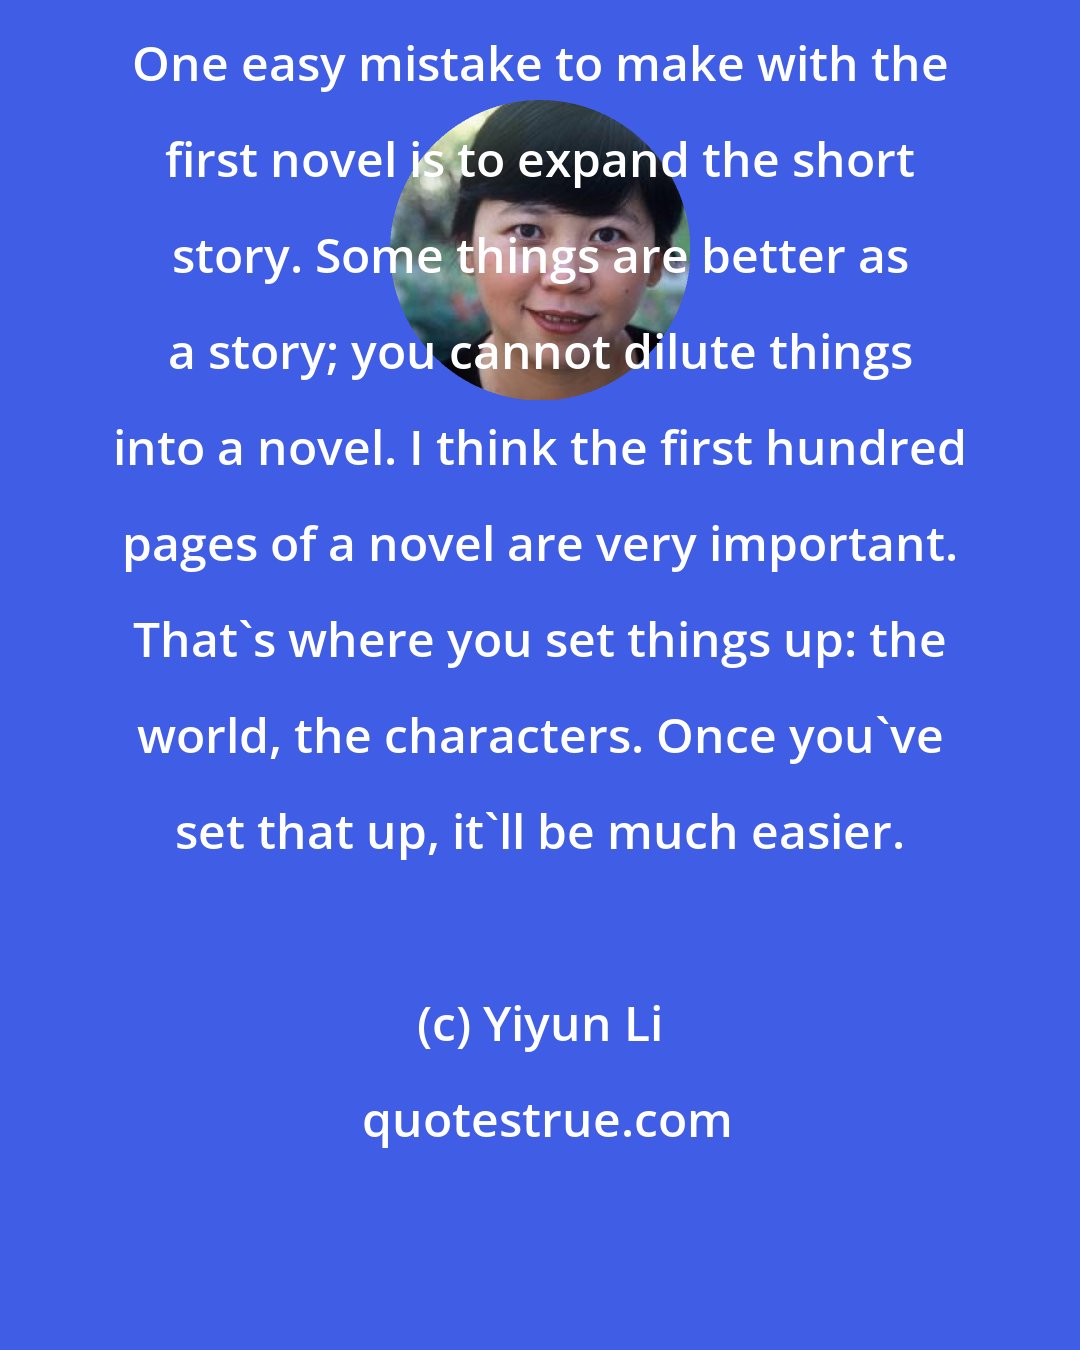 Yiyun Li: One easy mistake to make with the first novel is to expand the short story. Some things are better as a story; you cannot dilute things into a novel. I think the first hundred pages of a novel are very important. That's where you set things up: the world, the characters. Once you've set that up, it'll be much easier.